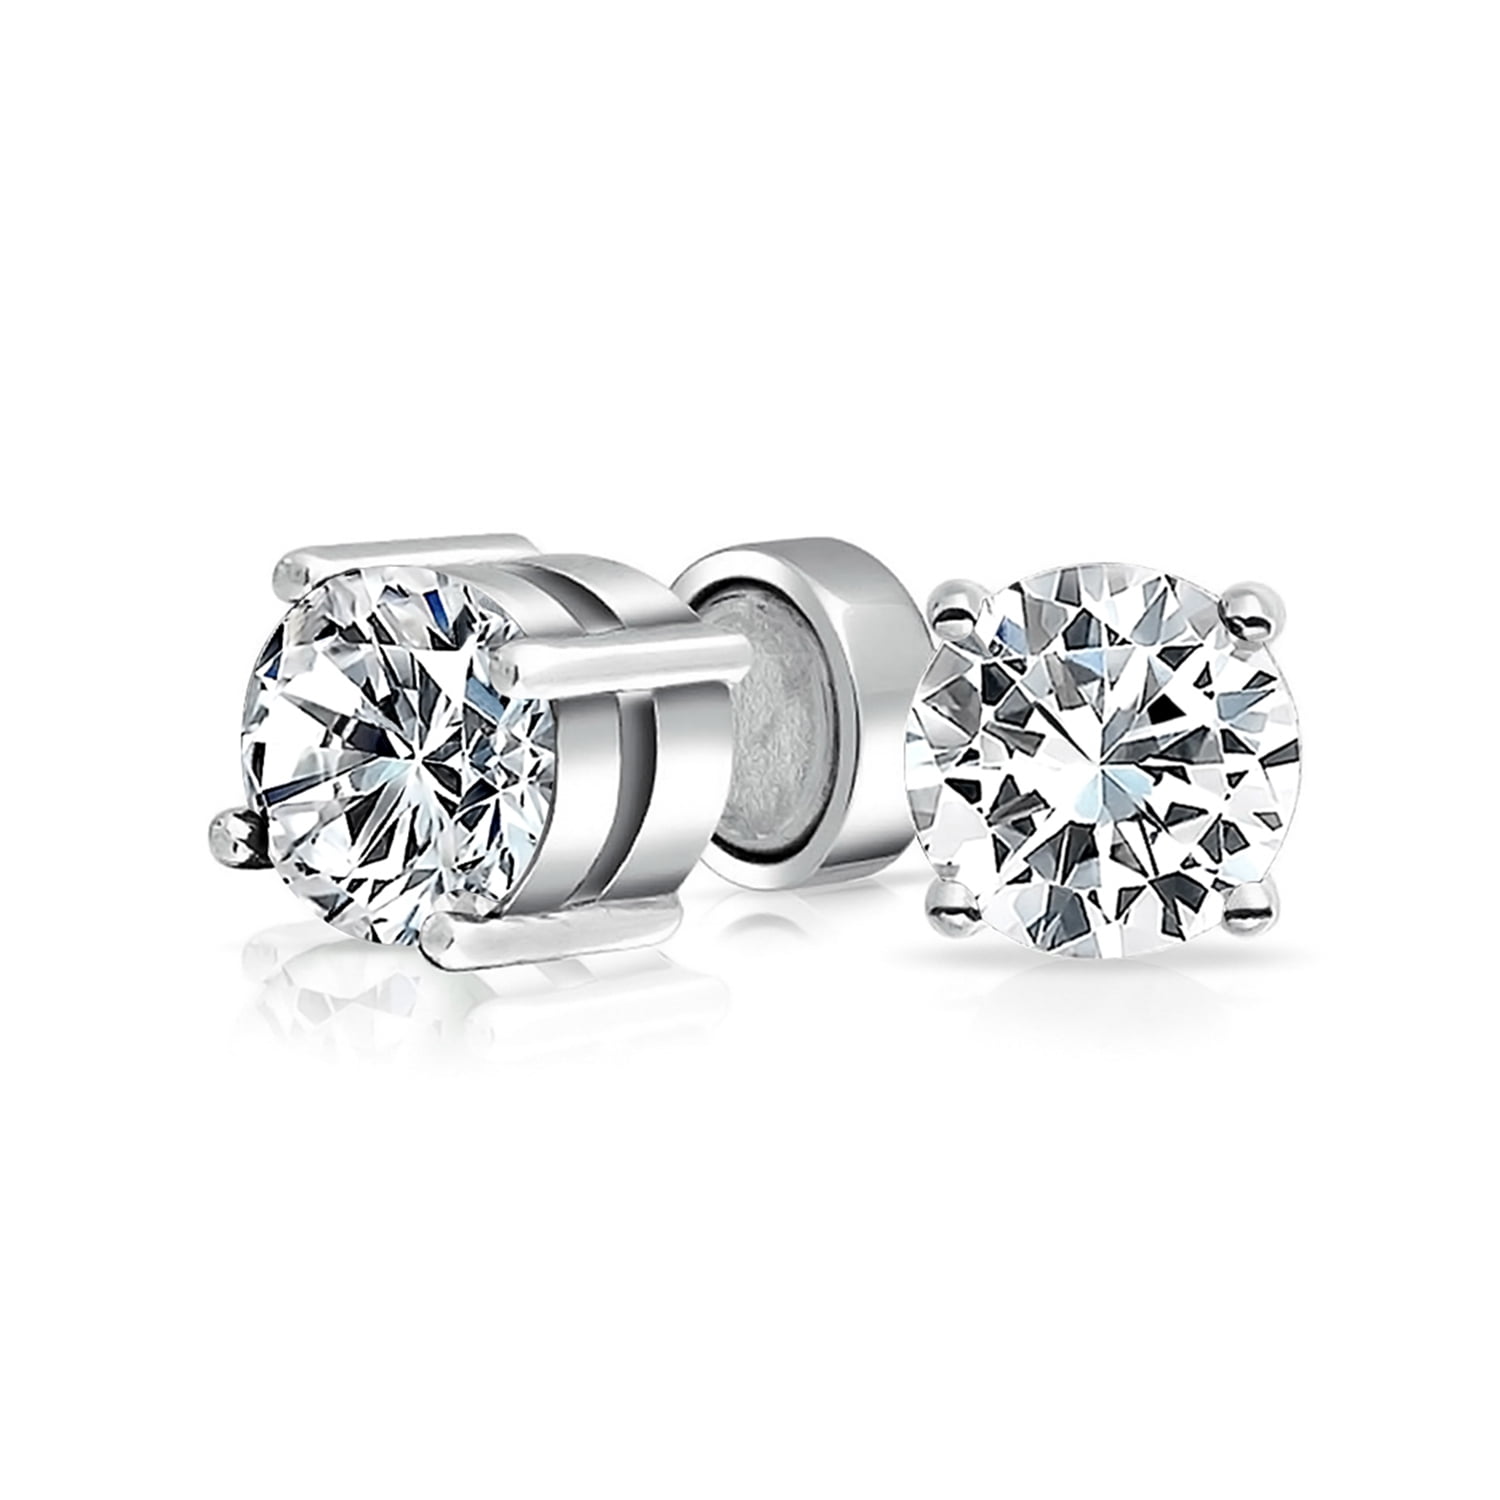 Details about   Sterling Silver AAAA Cubic Zirconia Round Shape Halo Ring 